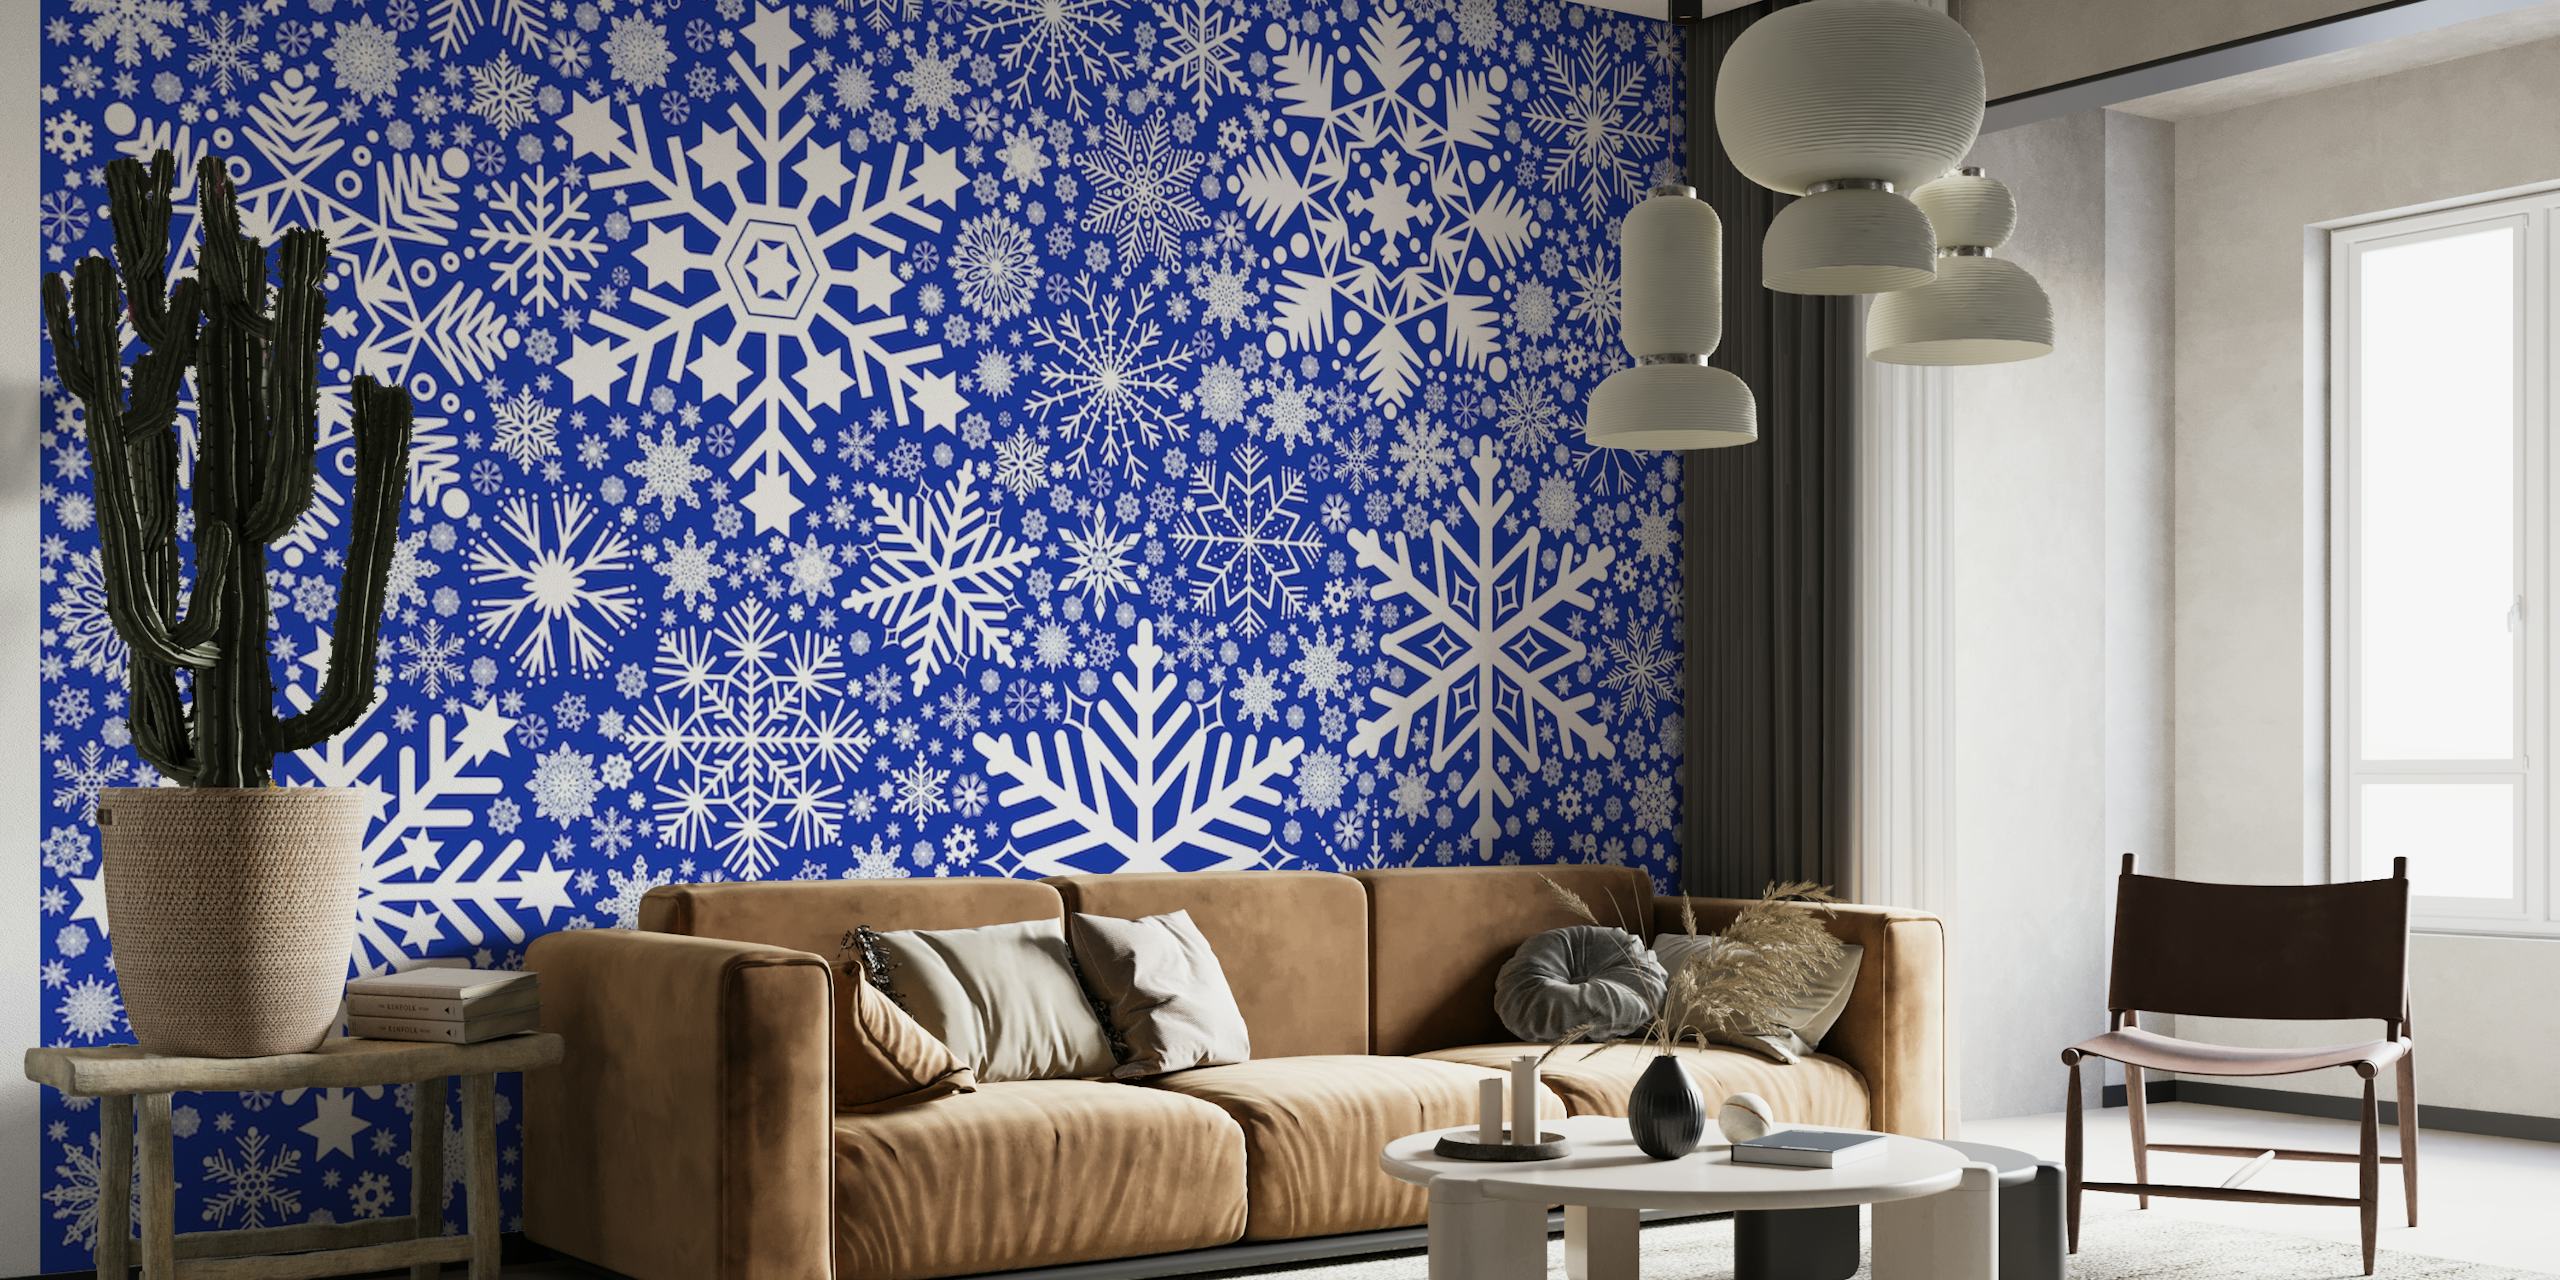 Snowflakes Background 6 behang